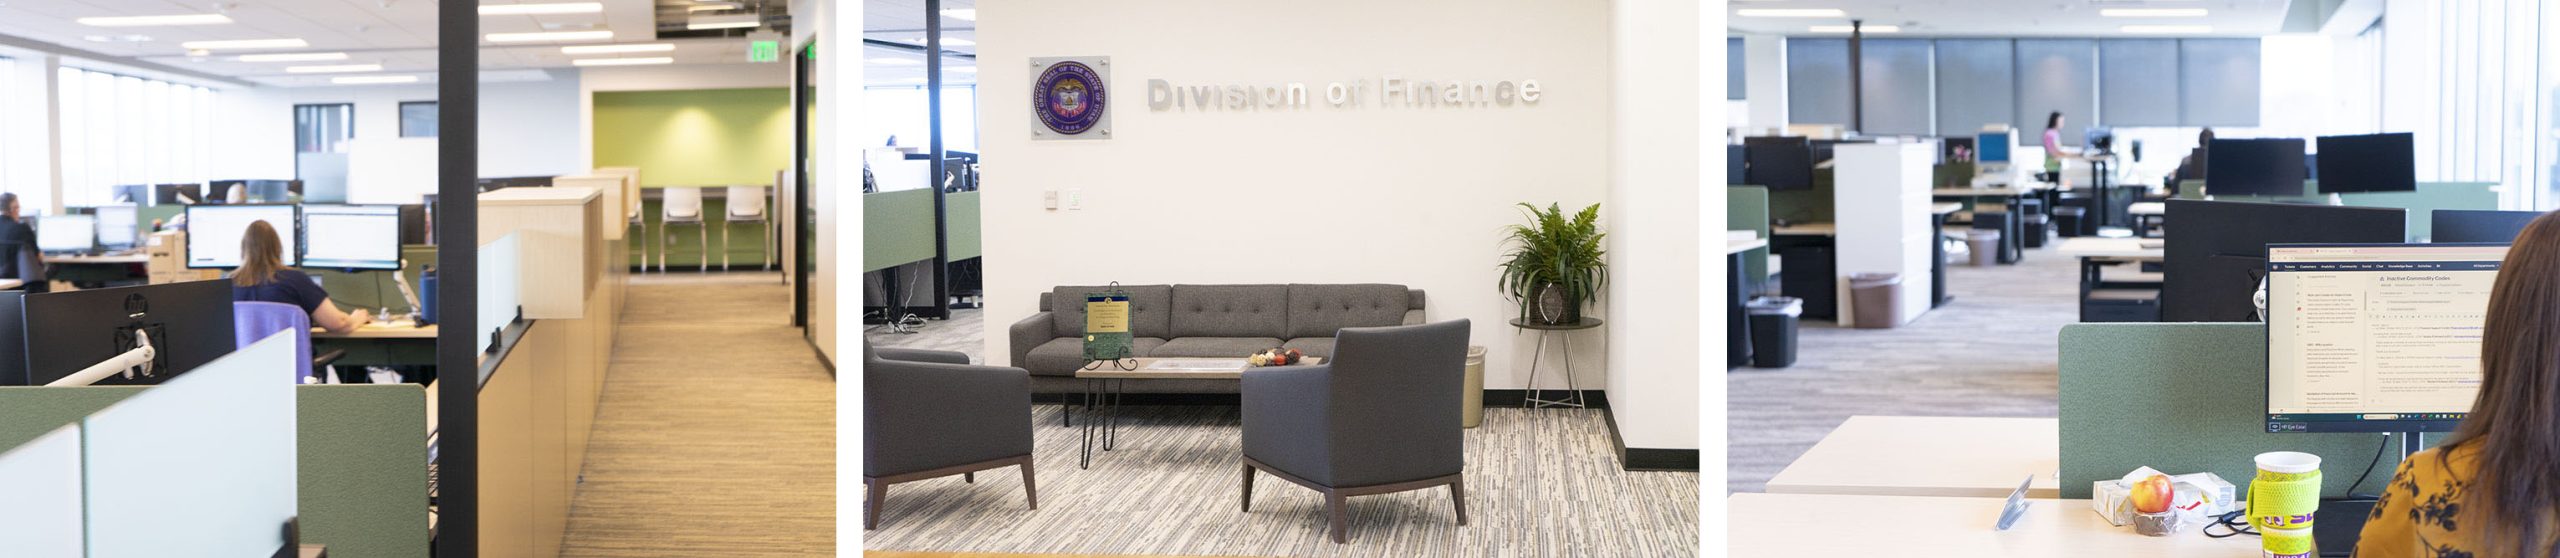 Division of Finance offices